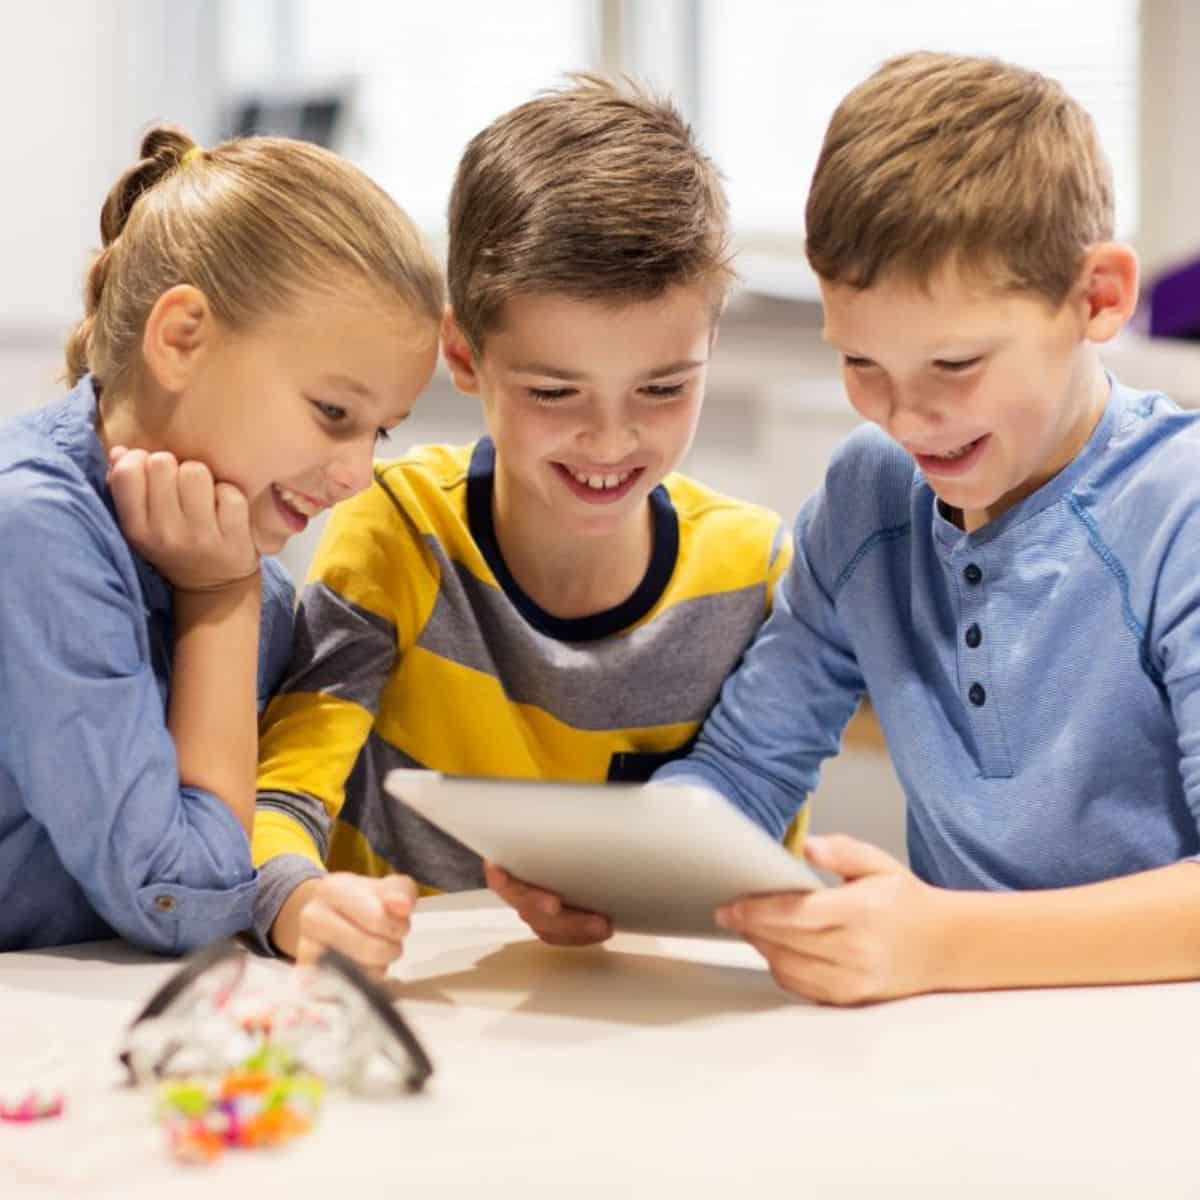 Three kids sitting at the desk and looking at a tablet.